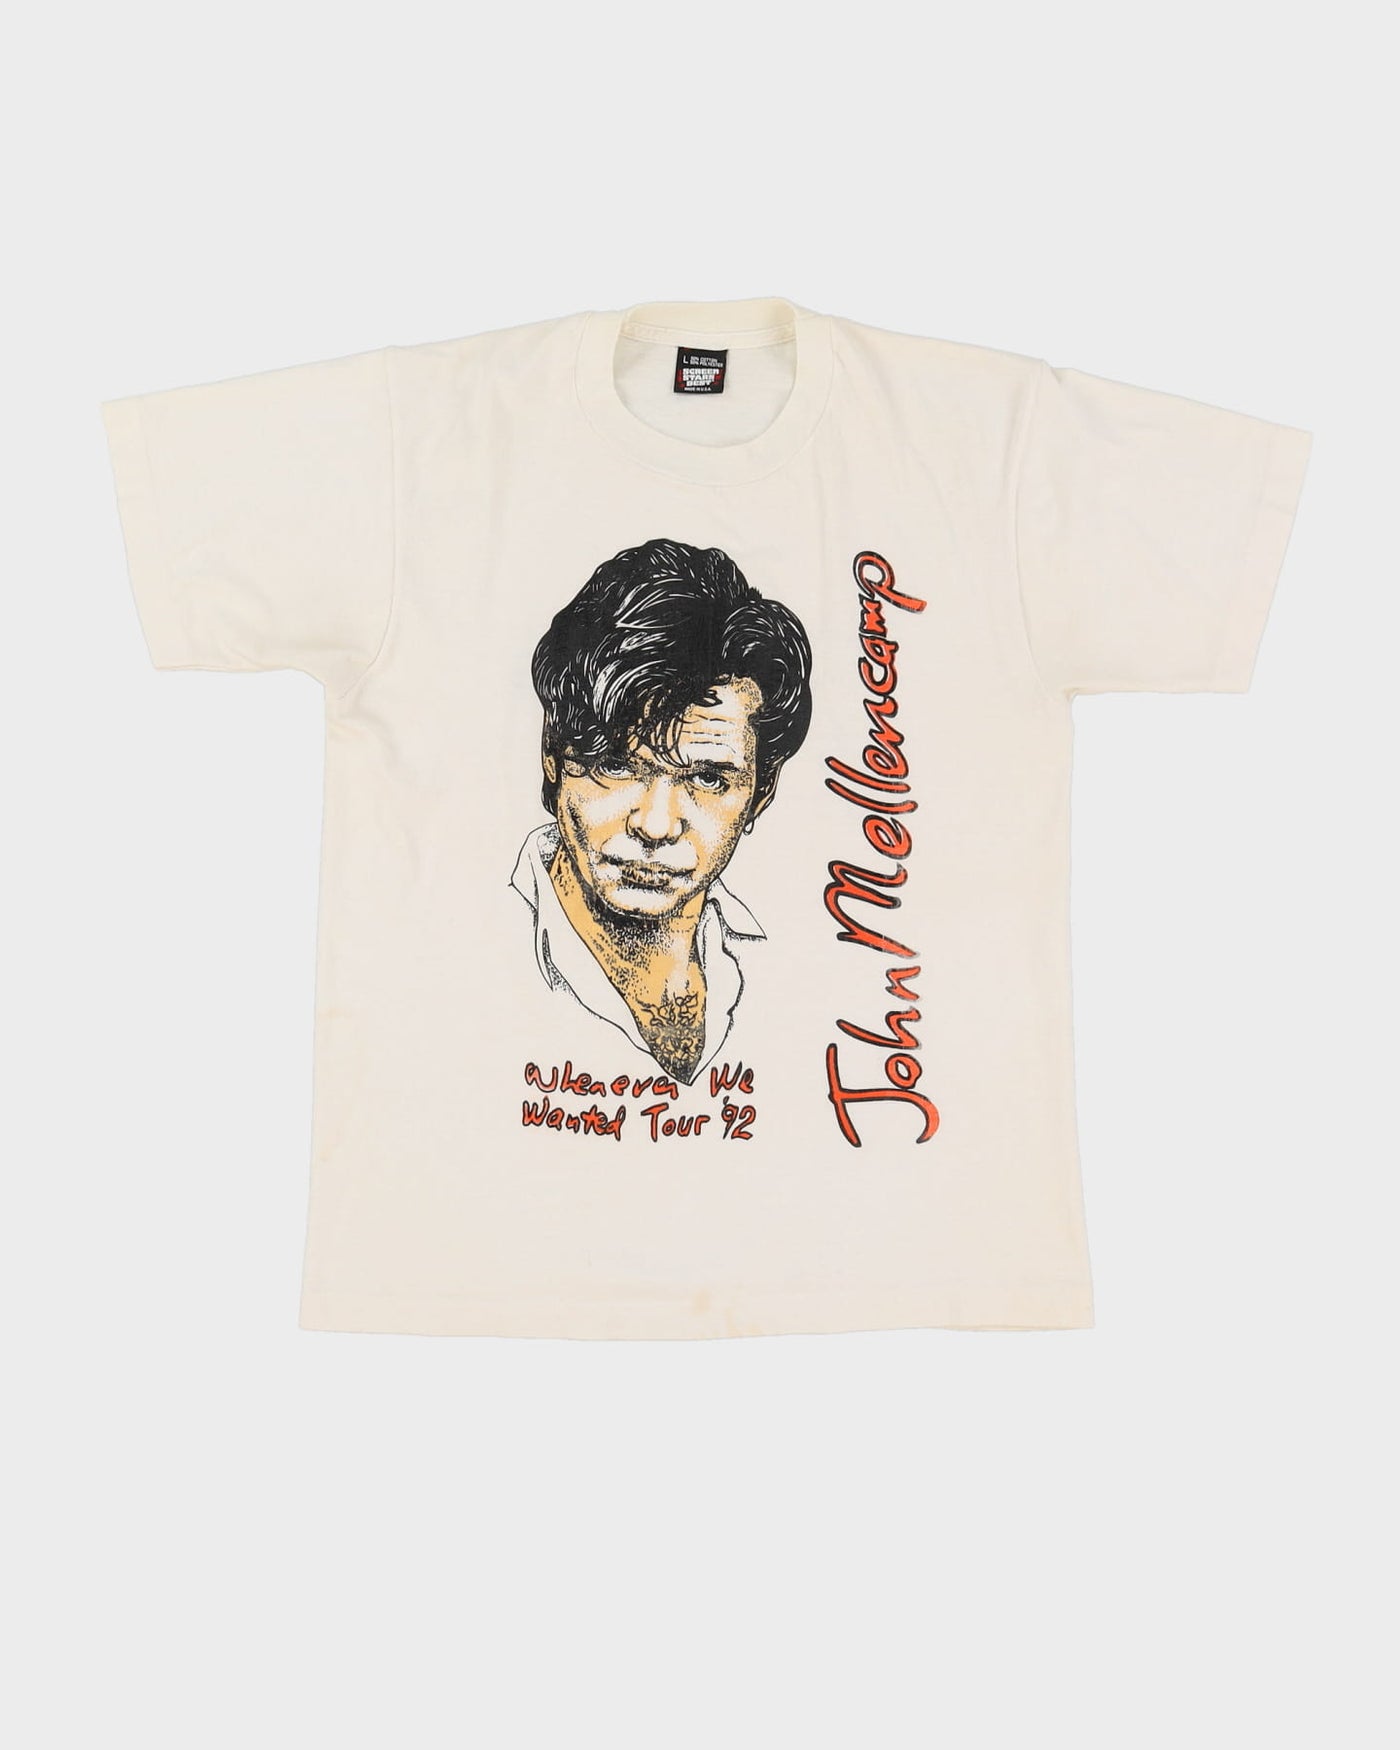 Vintage 1992 John Mellencamp Whenever We Wanted Tour White Graphic Band T-Shirt - M